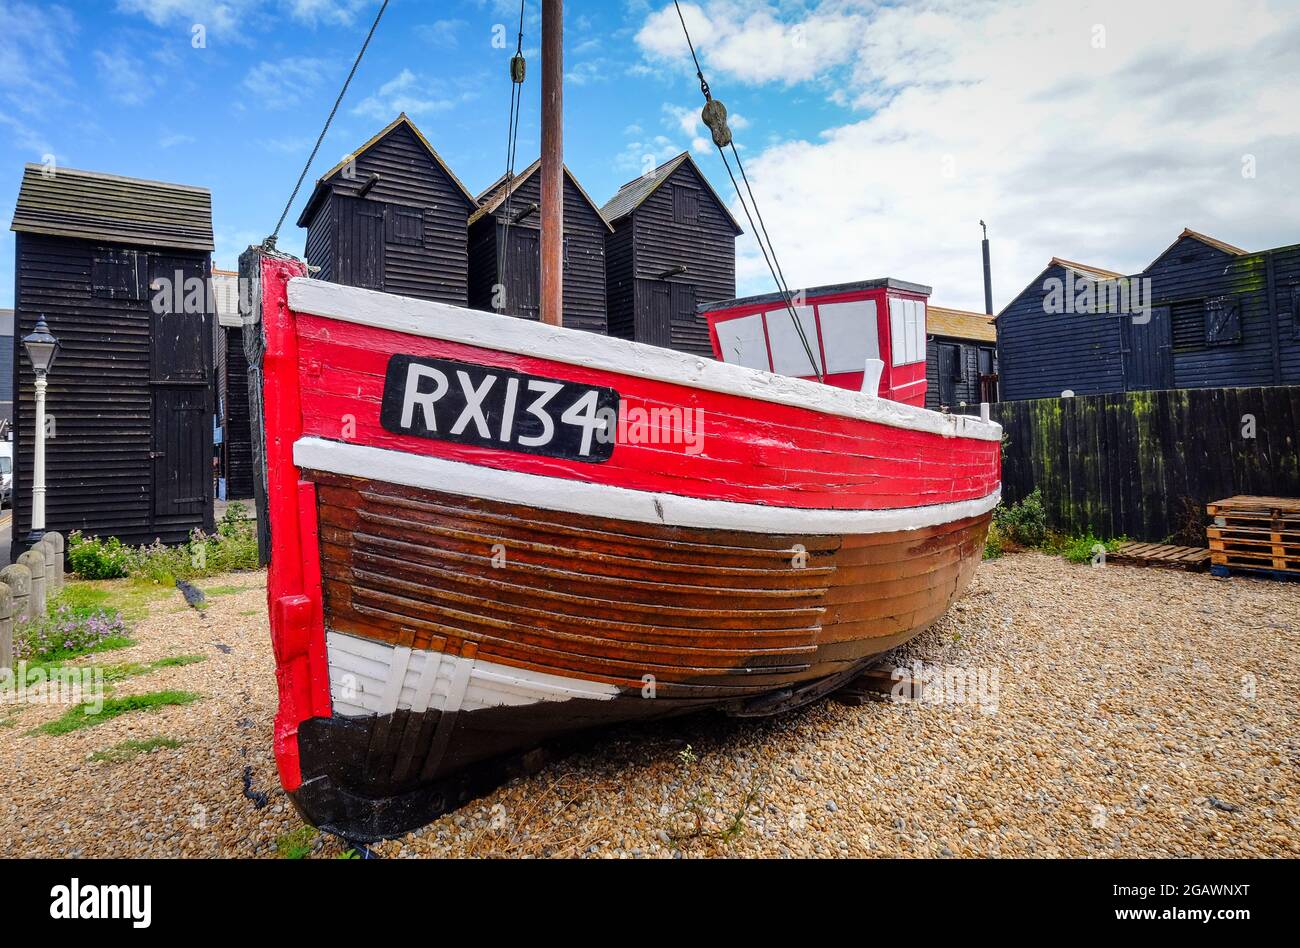 Historic fishing boat and Fishermens net houses, Hastlings Old Town, Hastlings, East Sussex, UK Stock Photo